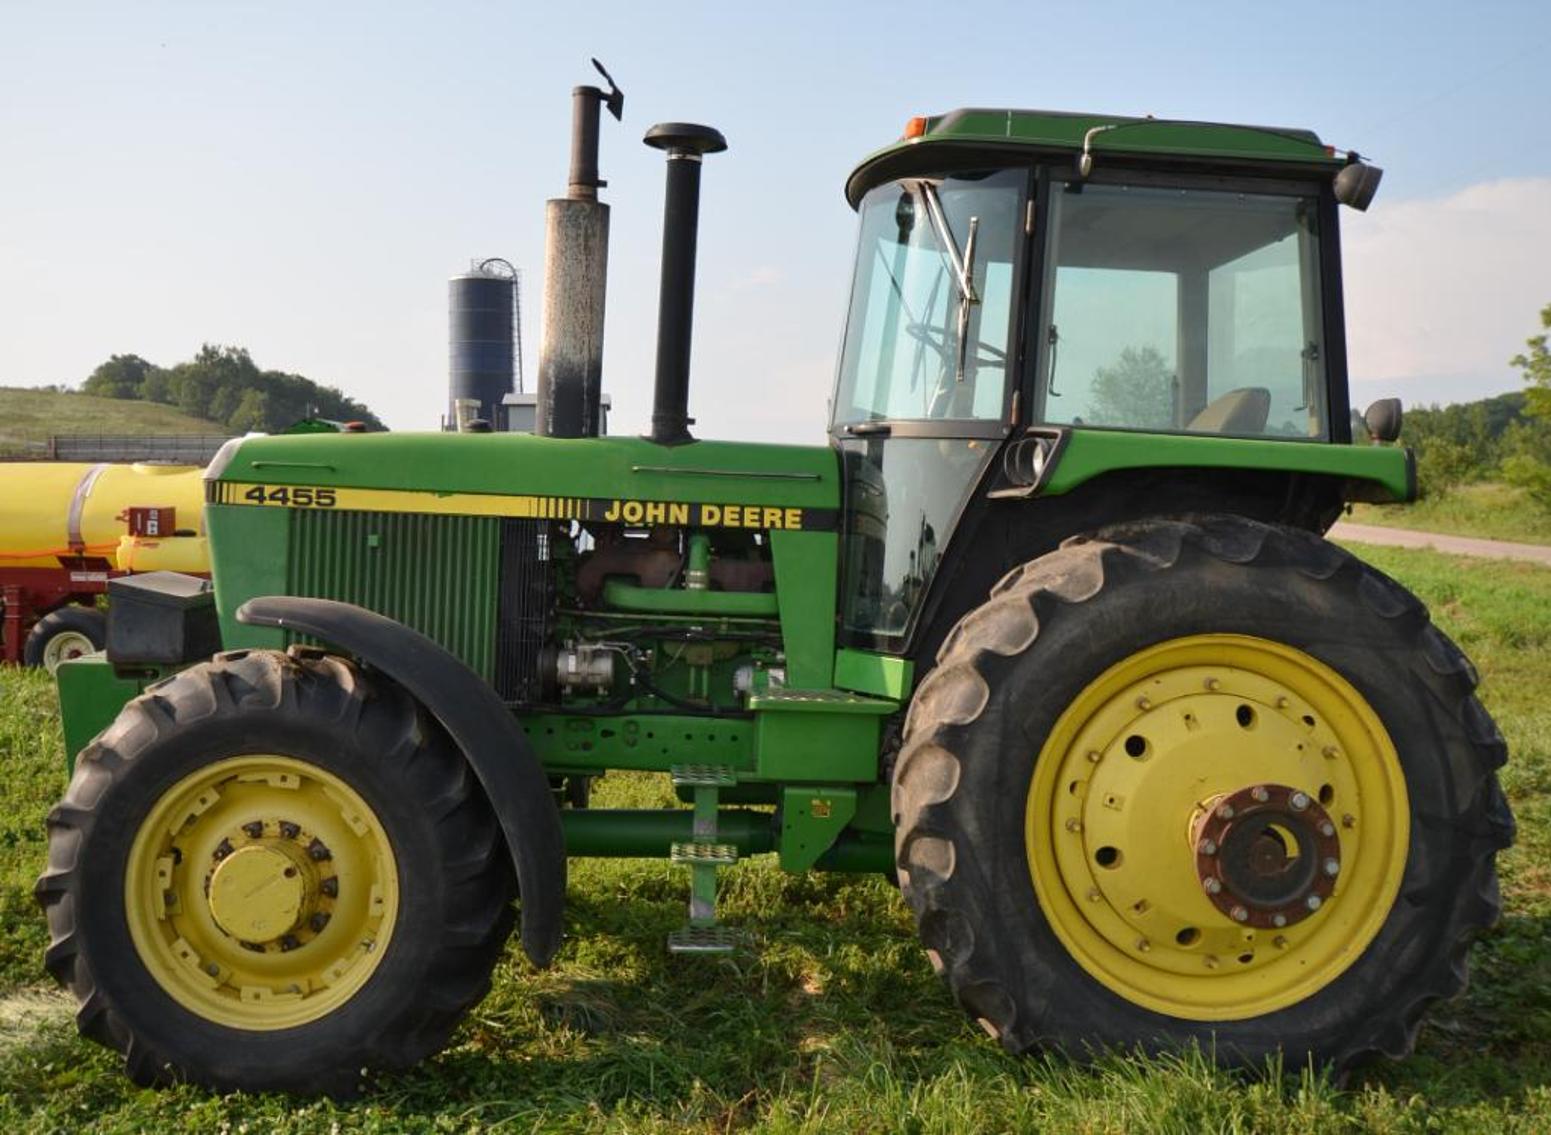 JD 9660 STS Combine & Heads, JD 4955, JD 4455, JD 7420 w/ Loader, Ford TW-35 and Farm Equipment